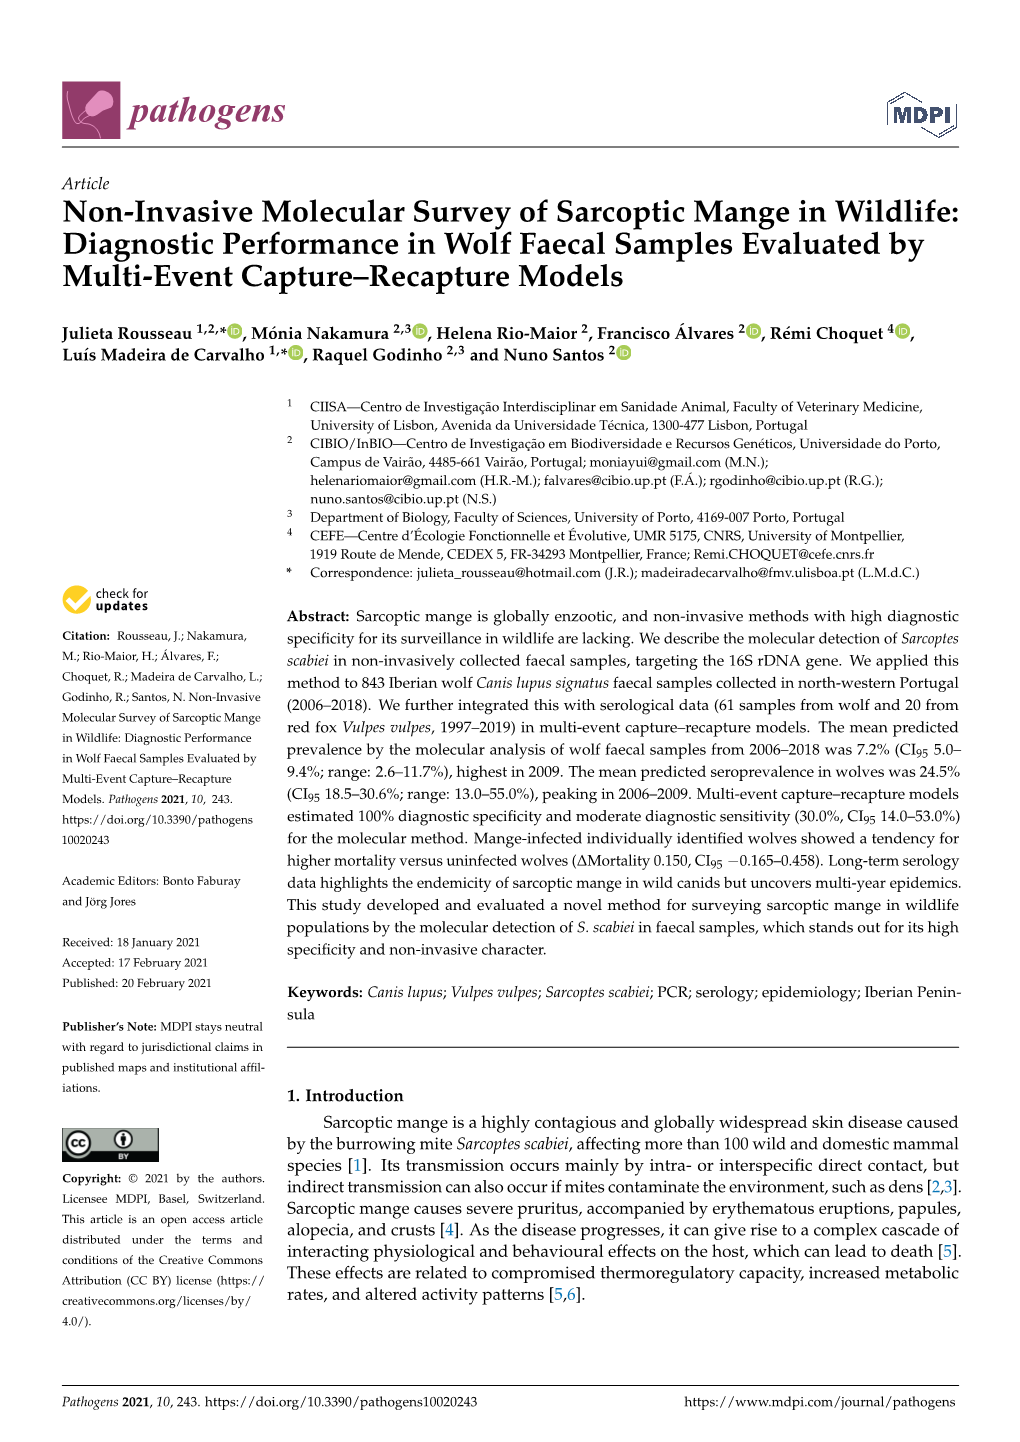 Non-Invasive Molecular Survey of Sarcoptic Mange in Wildlife: Diagnostic Performance in Wolf Faecal Samples Evaluated by Multi-Event Capture–Recapture Models